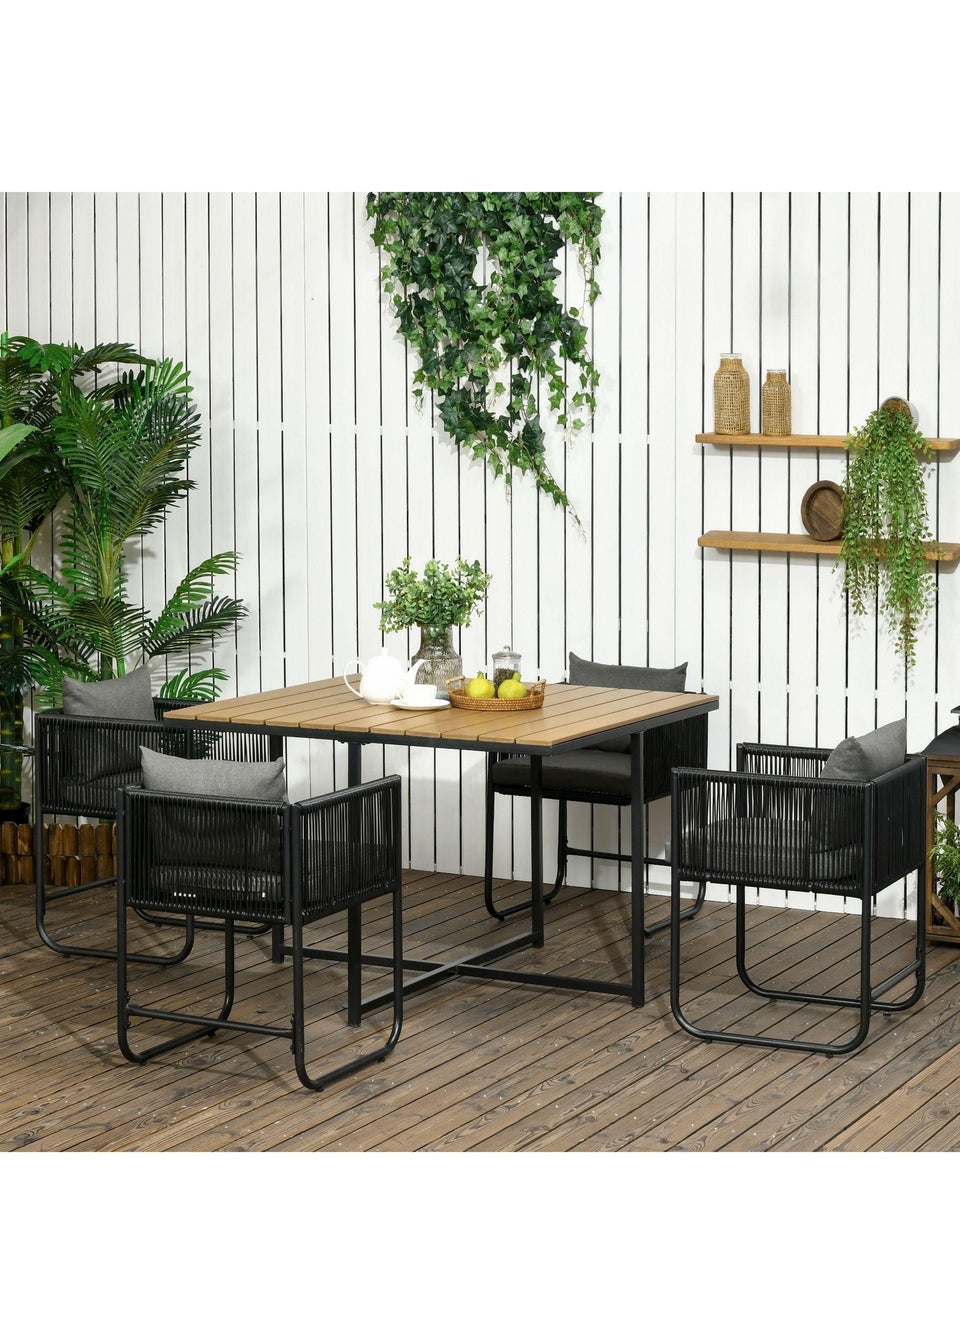 Outsunny Rattan Cube Dining Sets w/ Space-saving Design